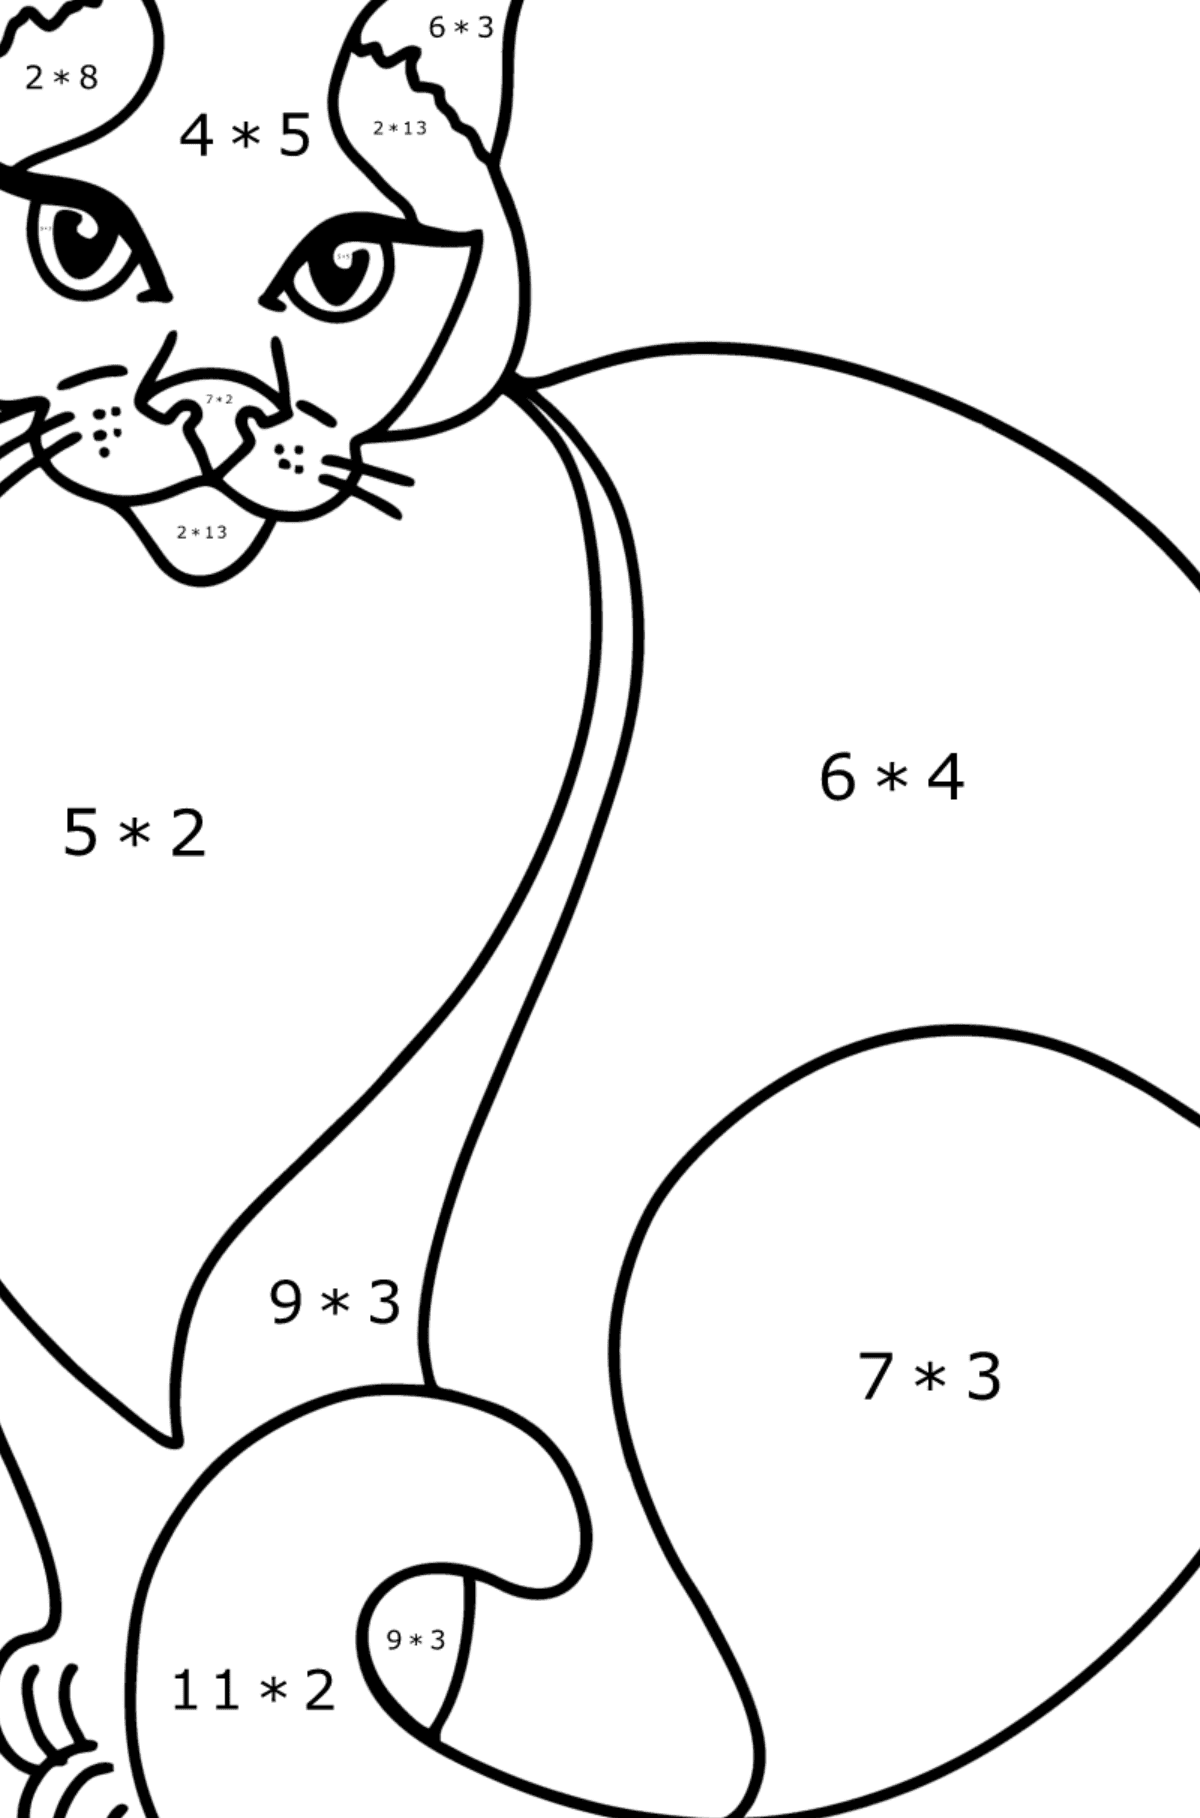 Siamese Cat coloring page - Math Coloring - Multiplication for Kids